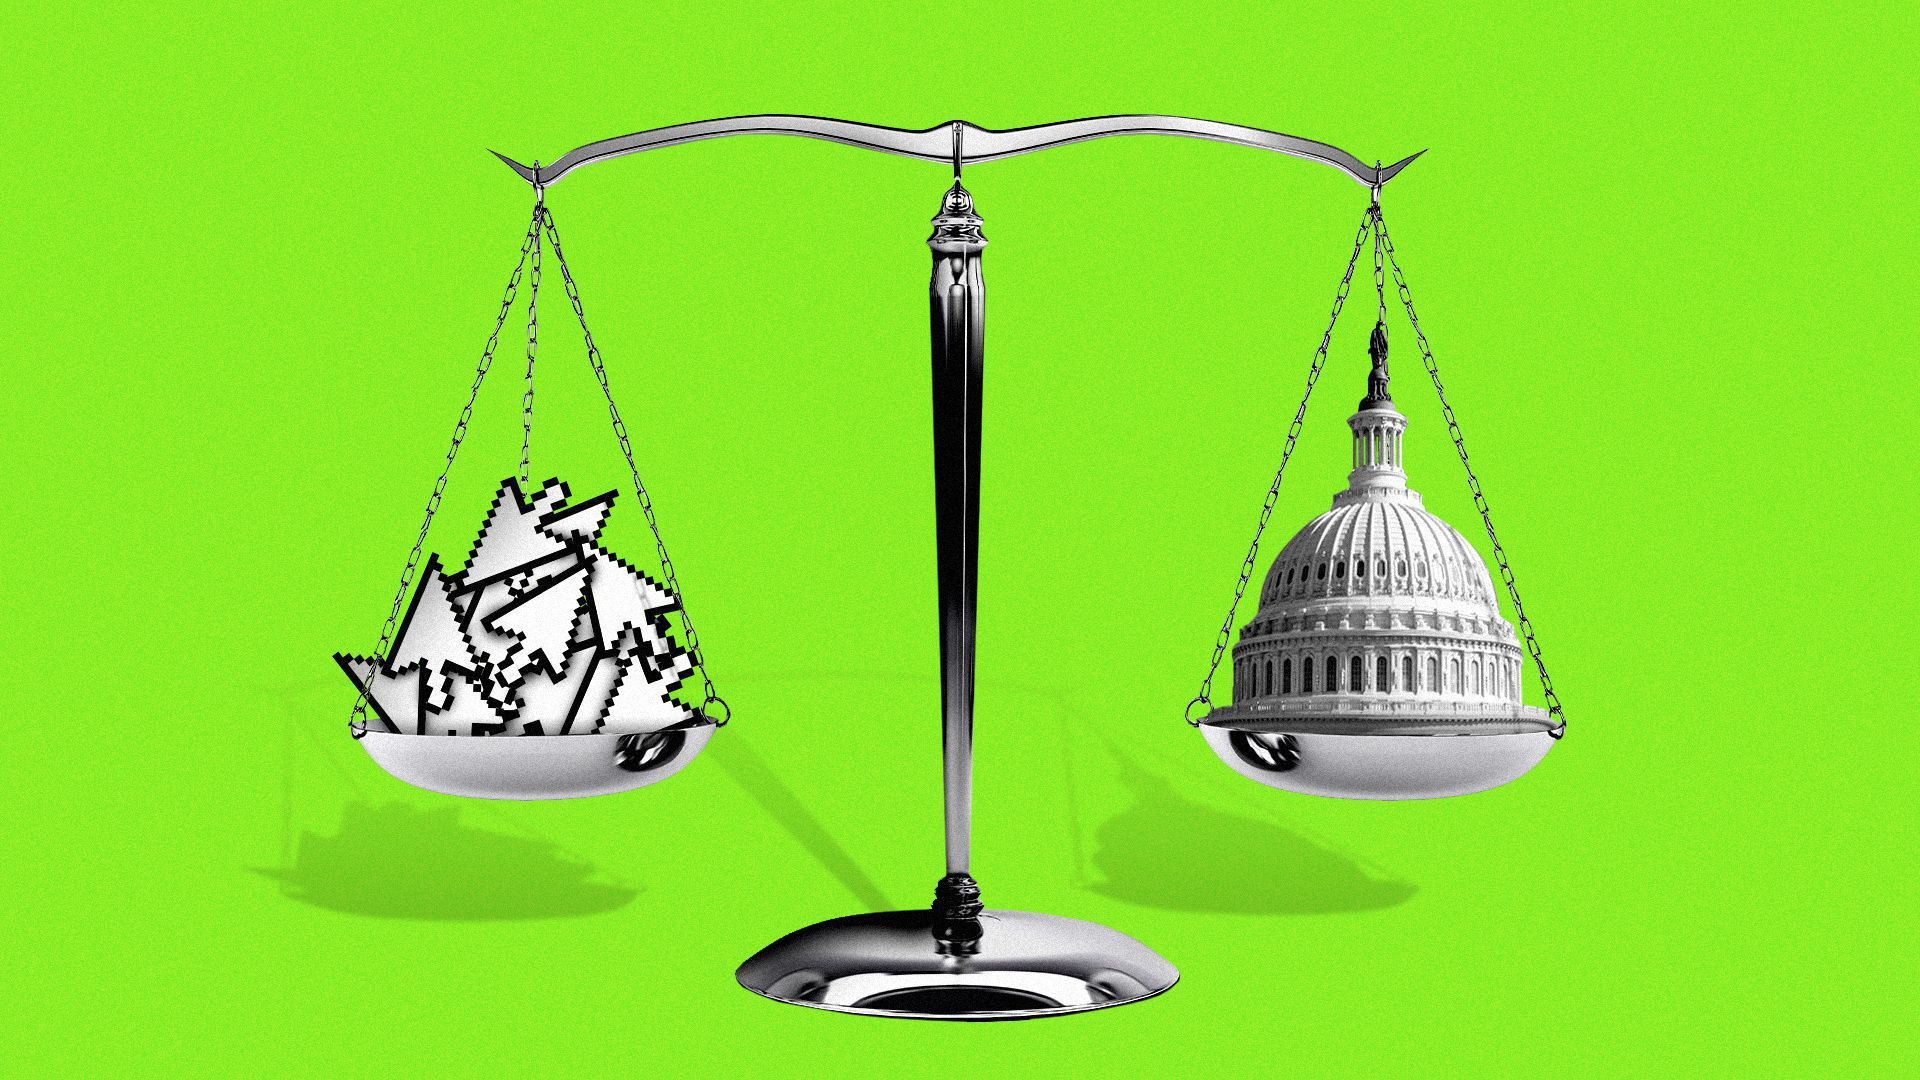 Illustration of the scales of justice, with arrows on one side and the Capitol building on the other side.